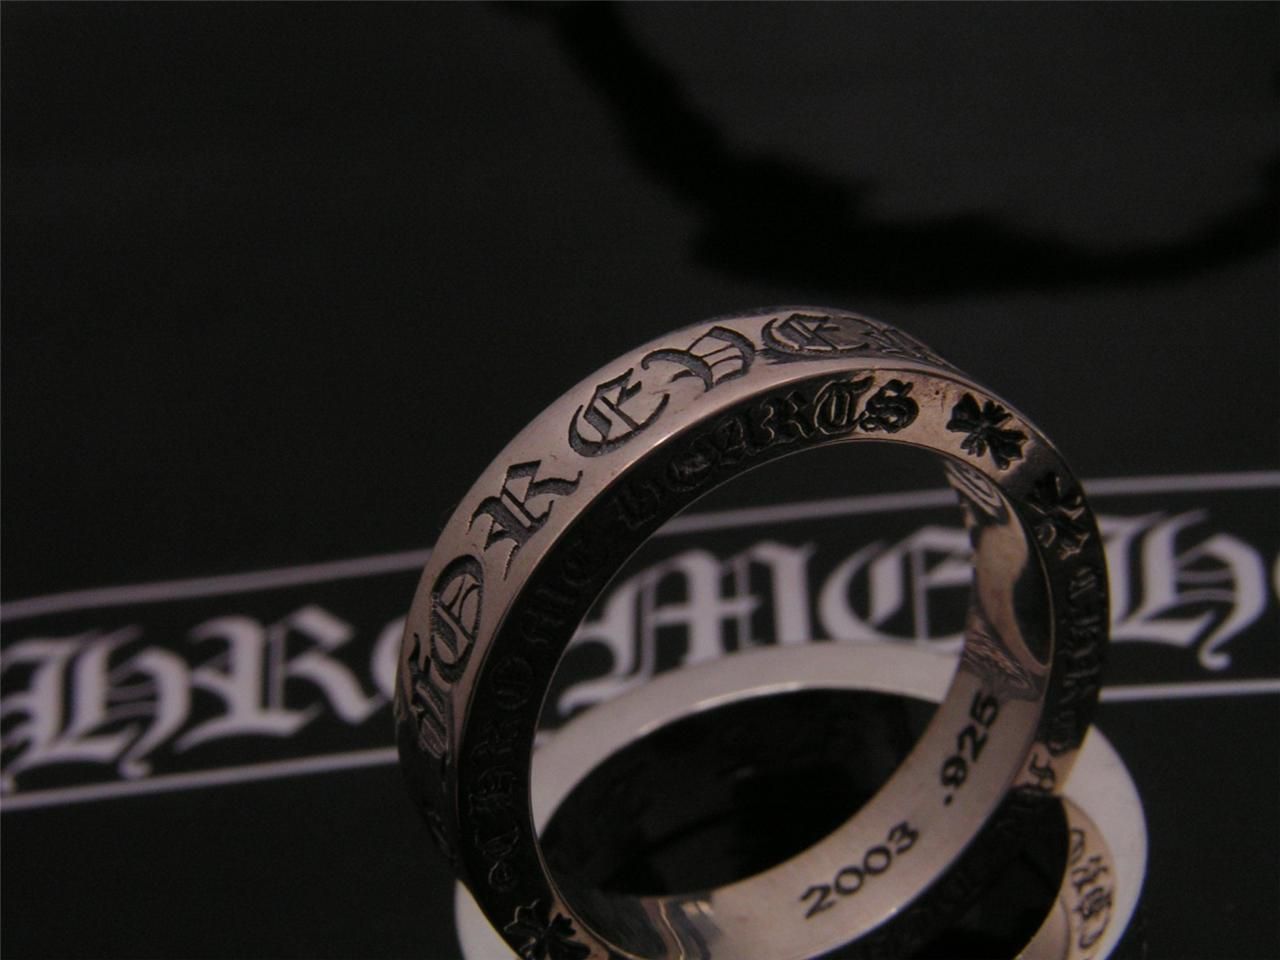 chrome hearts ring size 10 comes with leather dust bag